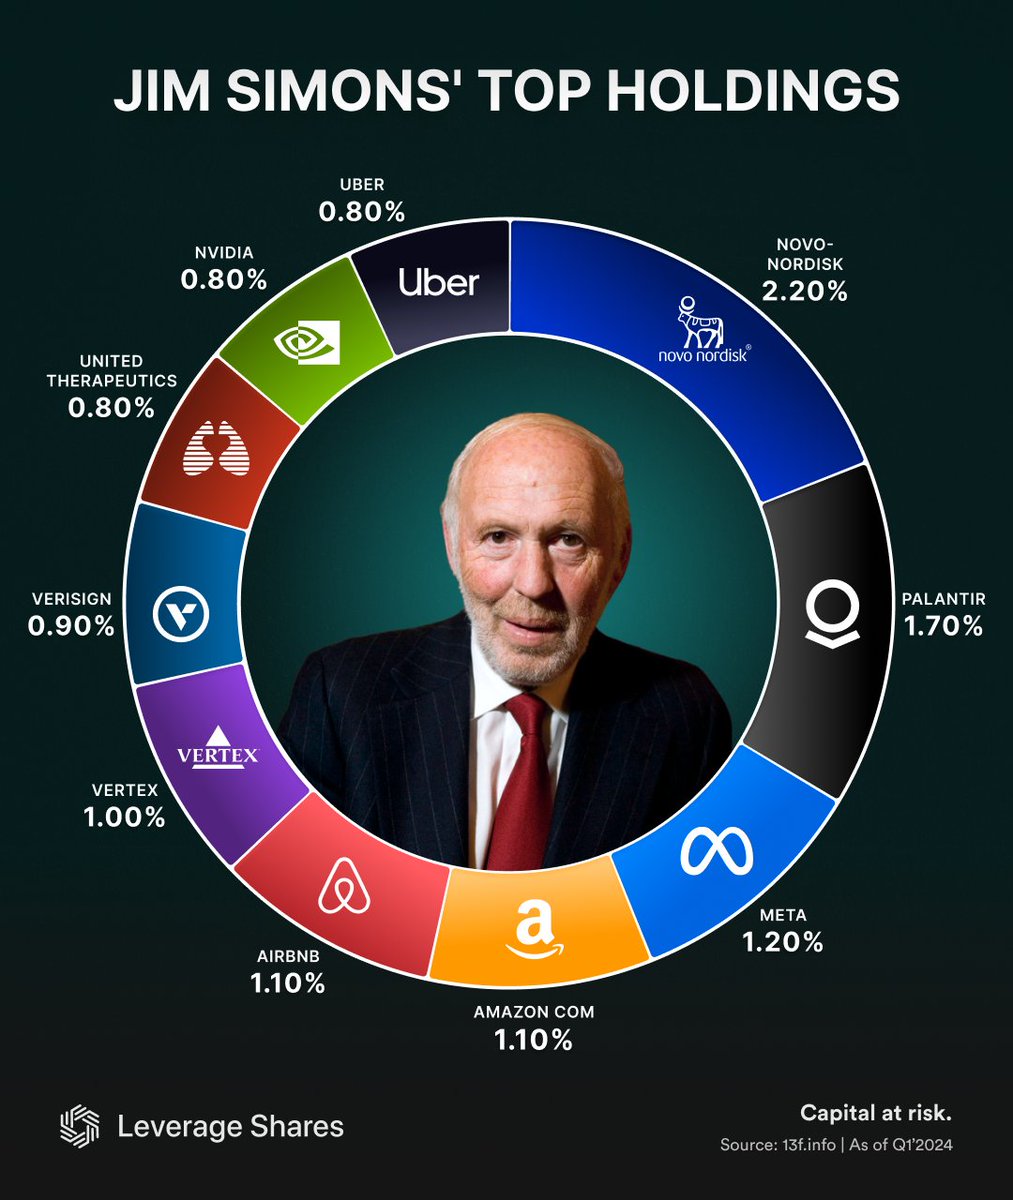 Renaissance Technologies, founded by Jim Simons, remains a pioneering force in quant trading. Despite Simons' recent passing, the firm continues to impact global markets. 🔝 holdings: - $PLTR - $NOVO - $AMZN - $ABNB - $META 📉 Key reductions: - $NVDA - $UBER ❌ Sold out: -